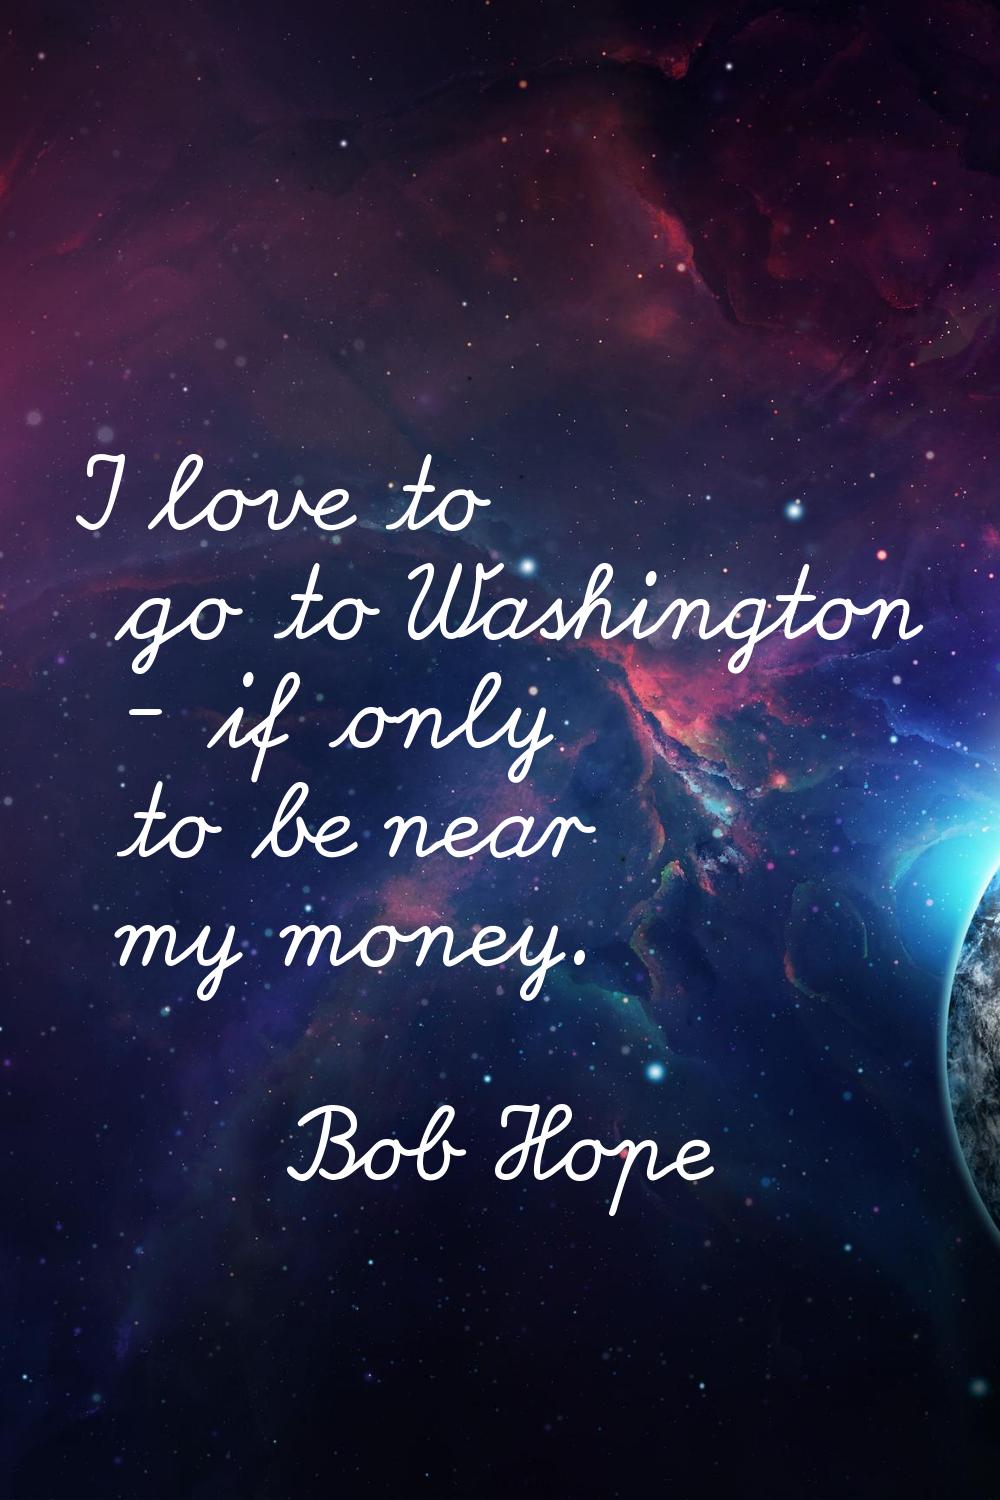 I love to go to Washington - if only to be near my money.